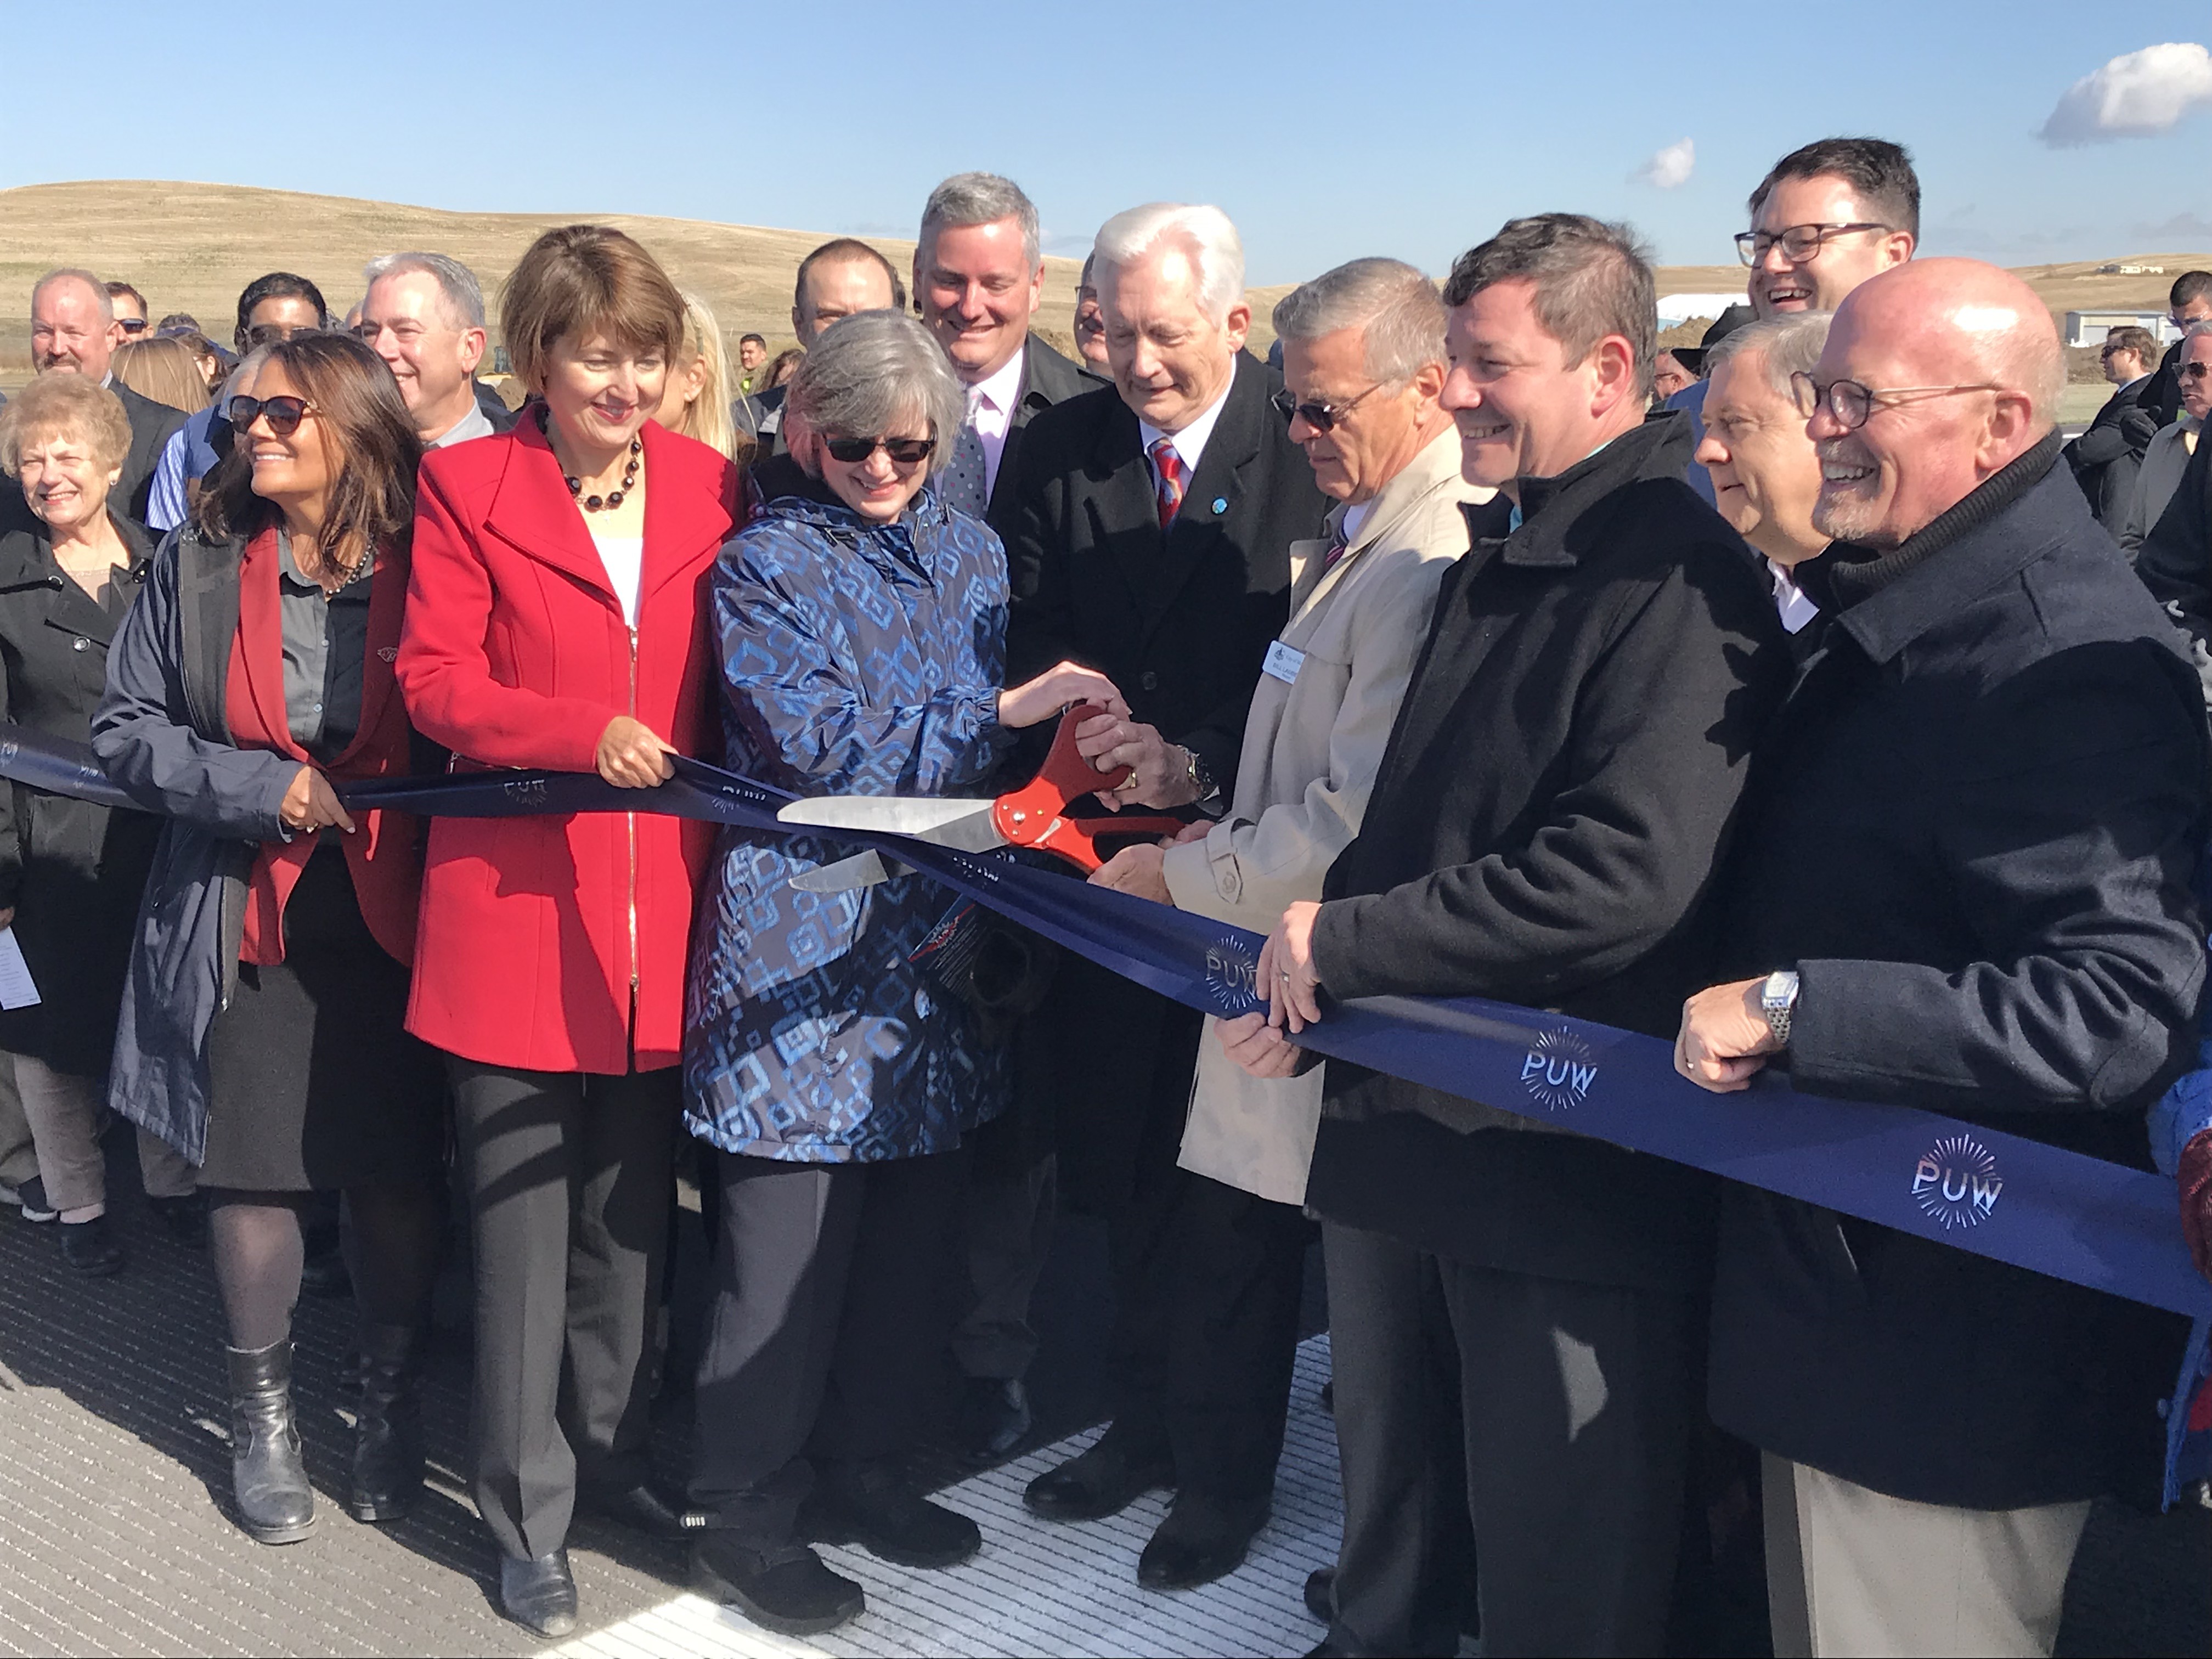 Local, state and federal officials were on hand Thursday, Oct. 10 for the ribbon cutting ceremony of the newly reopened Pullman-Moscow regional airport. U.S. Rep. Cathy McMorris Rodgers, left in red coat, praised the work of many partners. CREDIT: Cameron Sheppard/NWPB